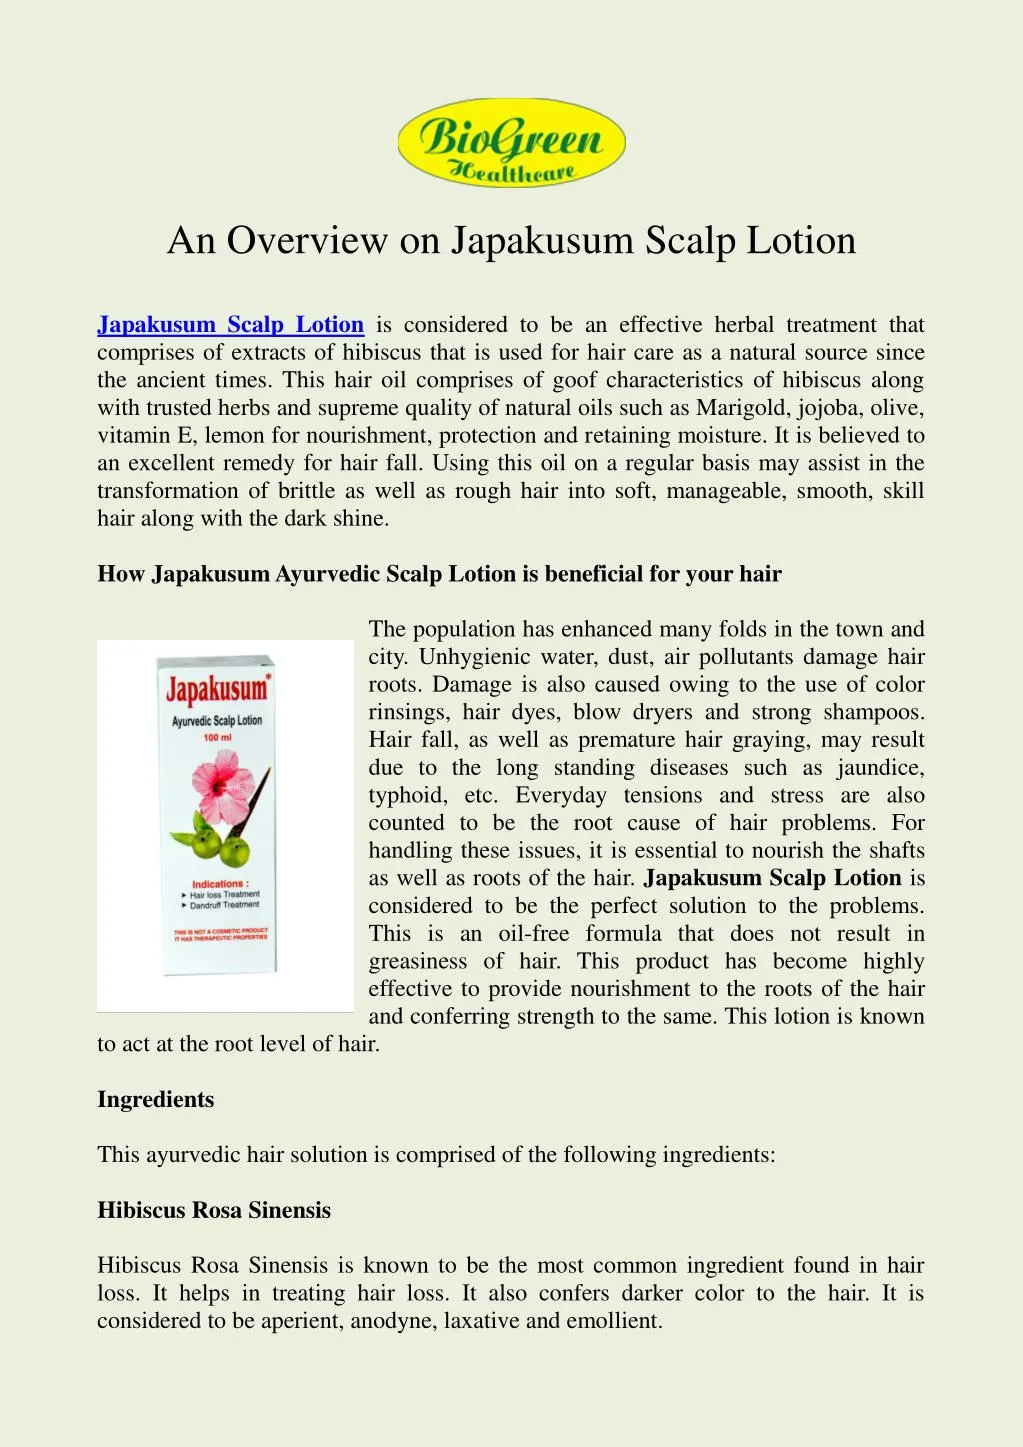 an overview on japakusum scalp lotion